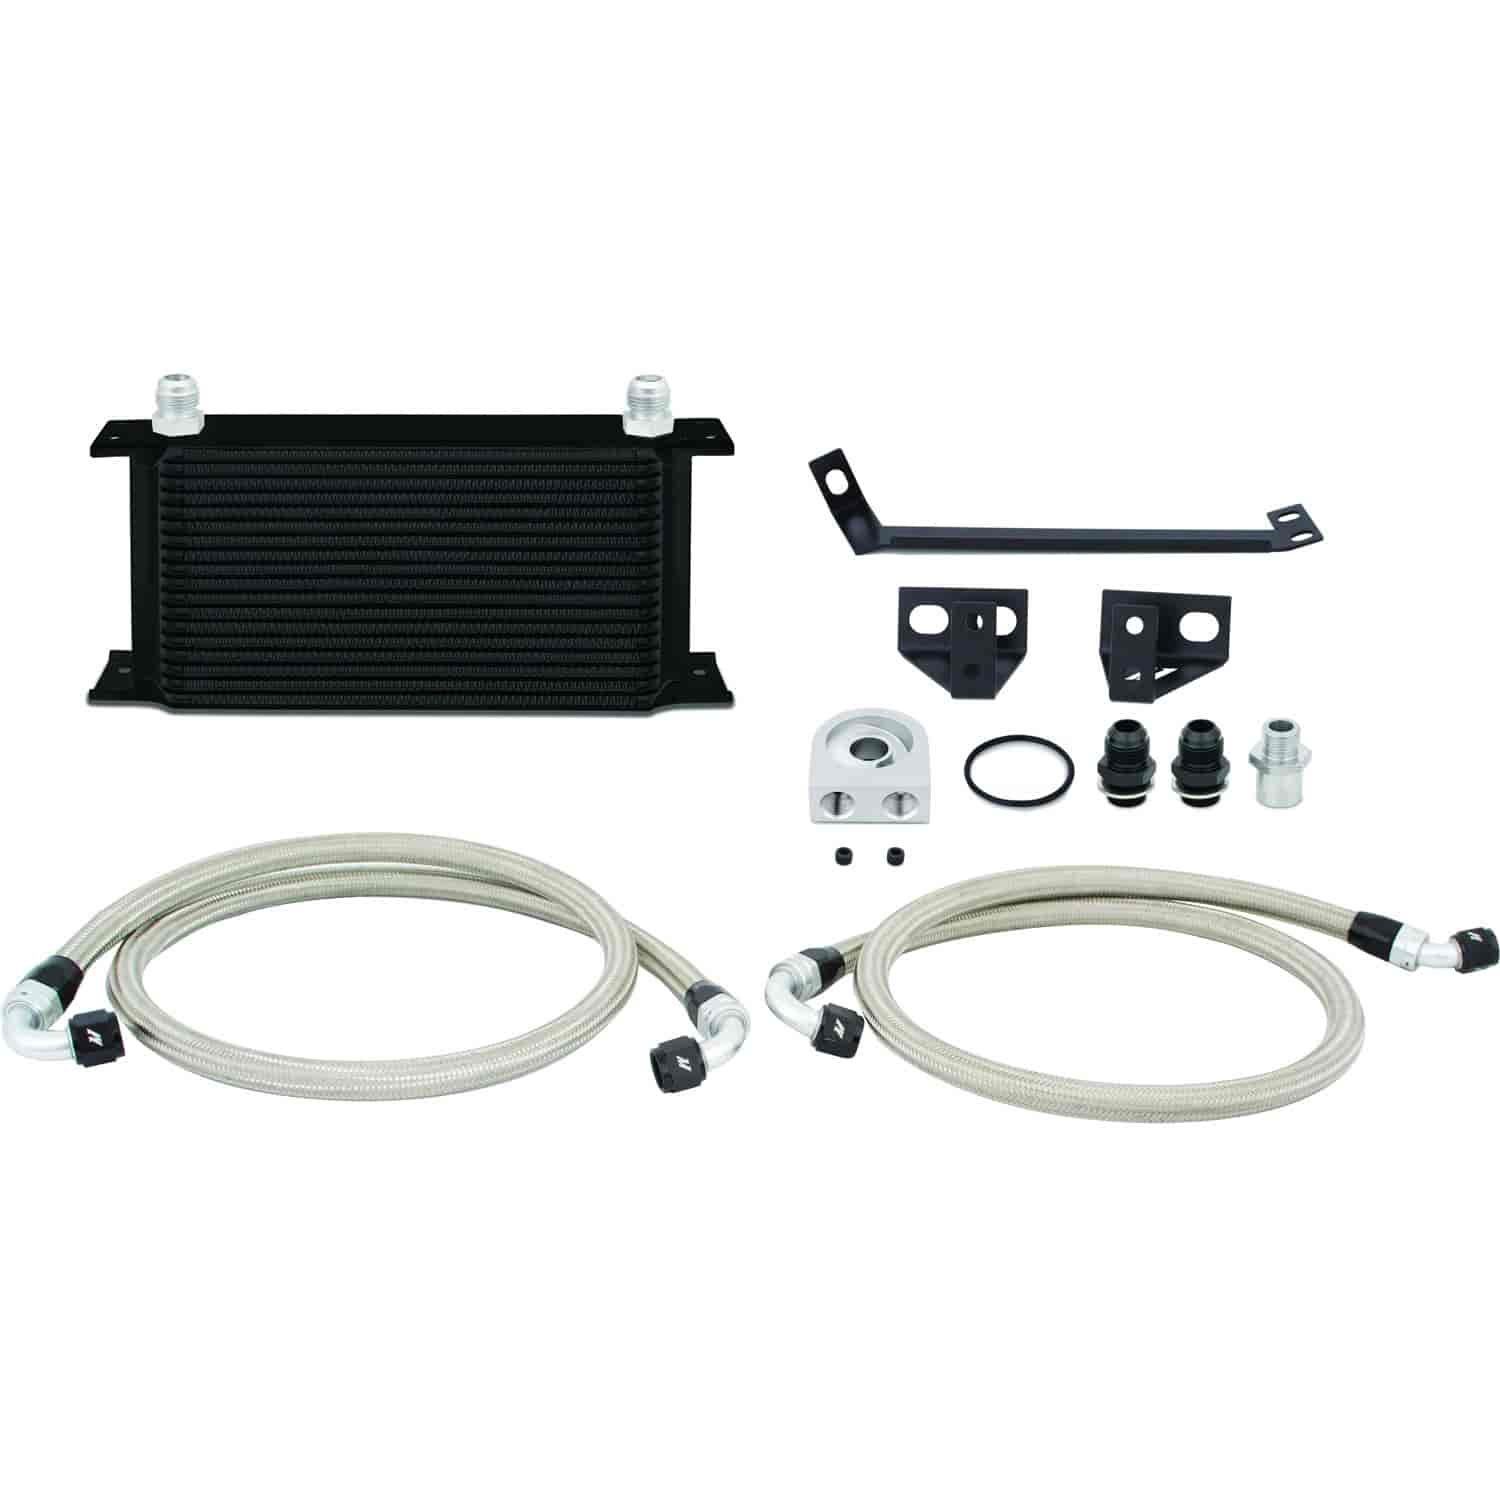 Ford Mustang EcoBoost Oil Cooler Kit - MFG Part No. MMOC-MUS4-15BK